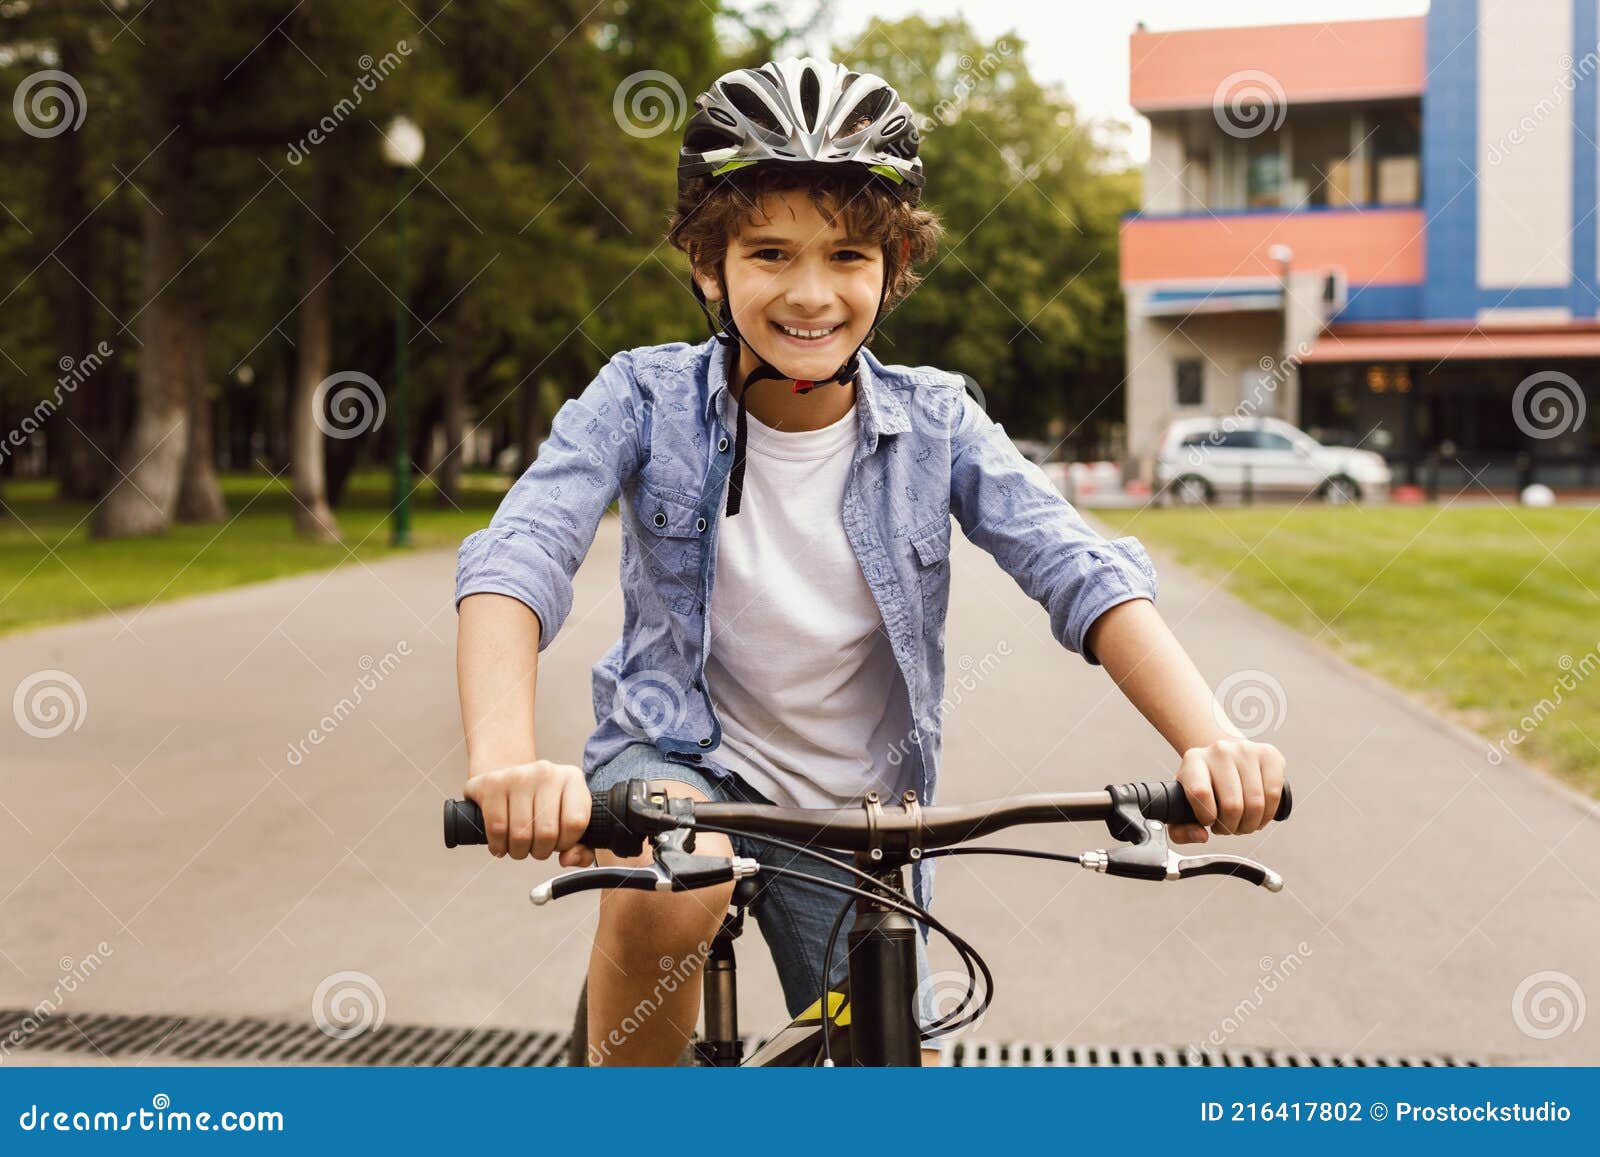 Smiling Boy Learning To Ride a Bicycle in Park Stock Photo - Image of ...